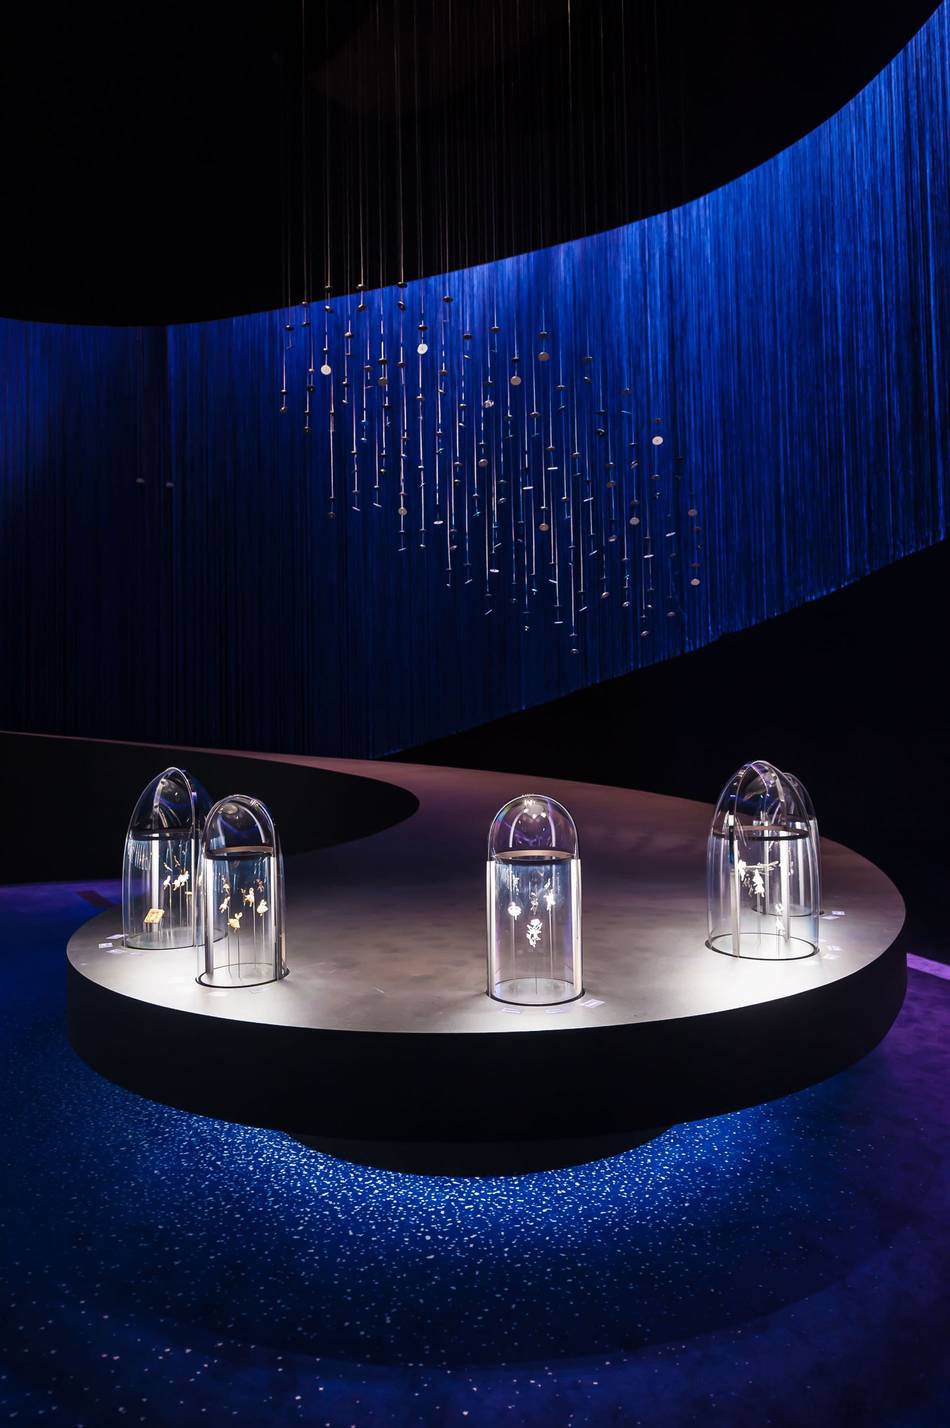 The ArtScience Museum will showcase over 400 stunning creations from Van Cleef & Arpels and 250 minerals from the French National Museum of Natural History Collection